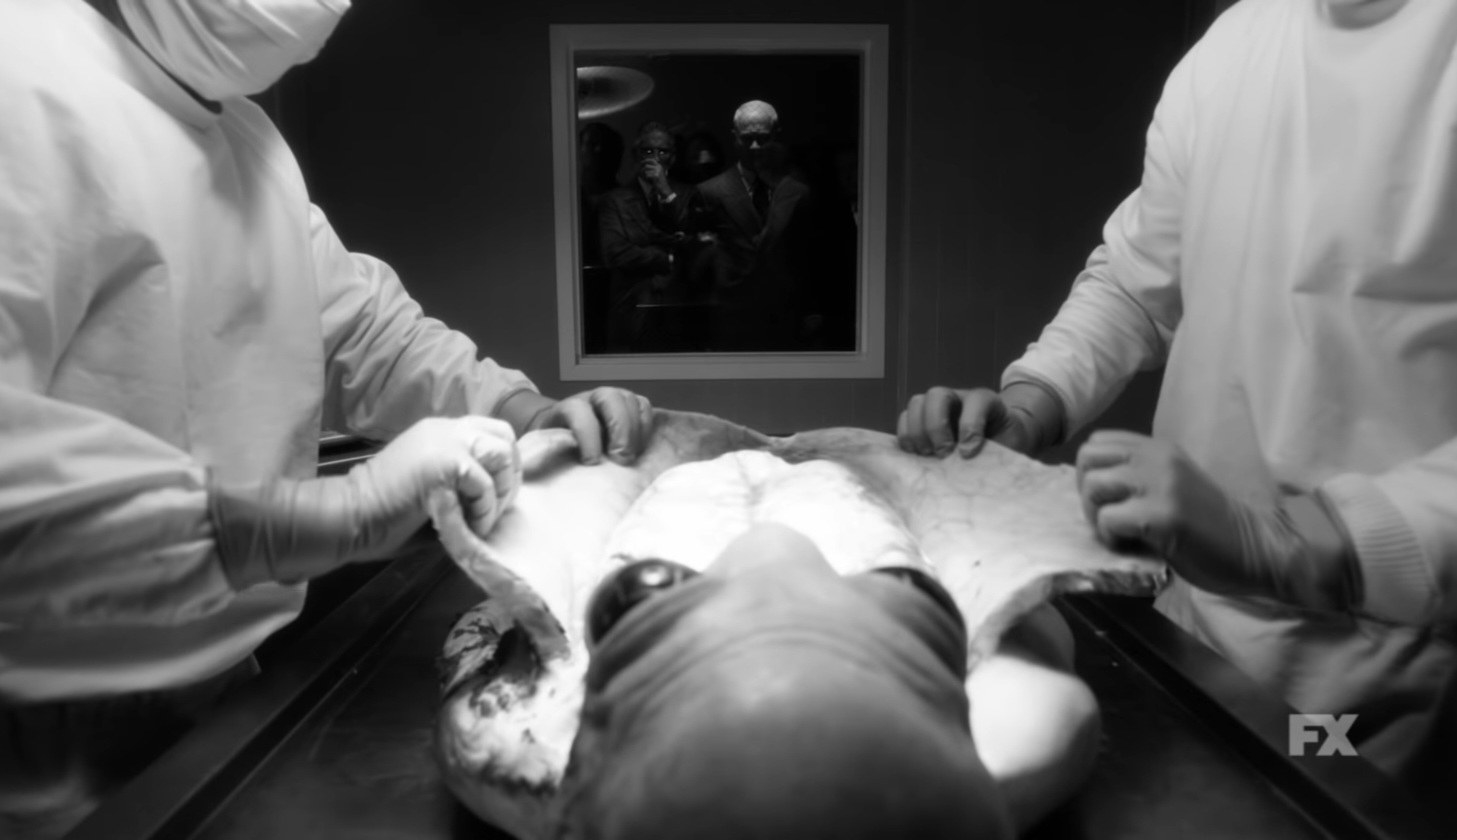 An alien is given an autopsy on &quot;American Horror Story&quot;